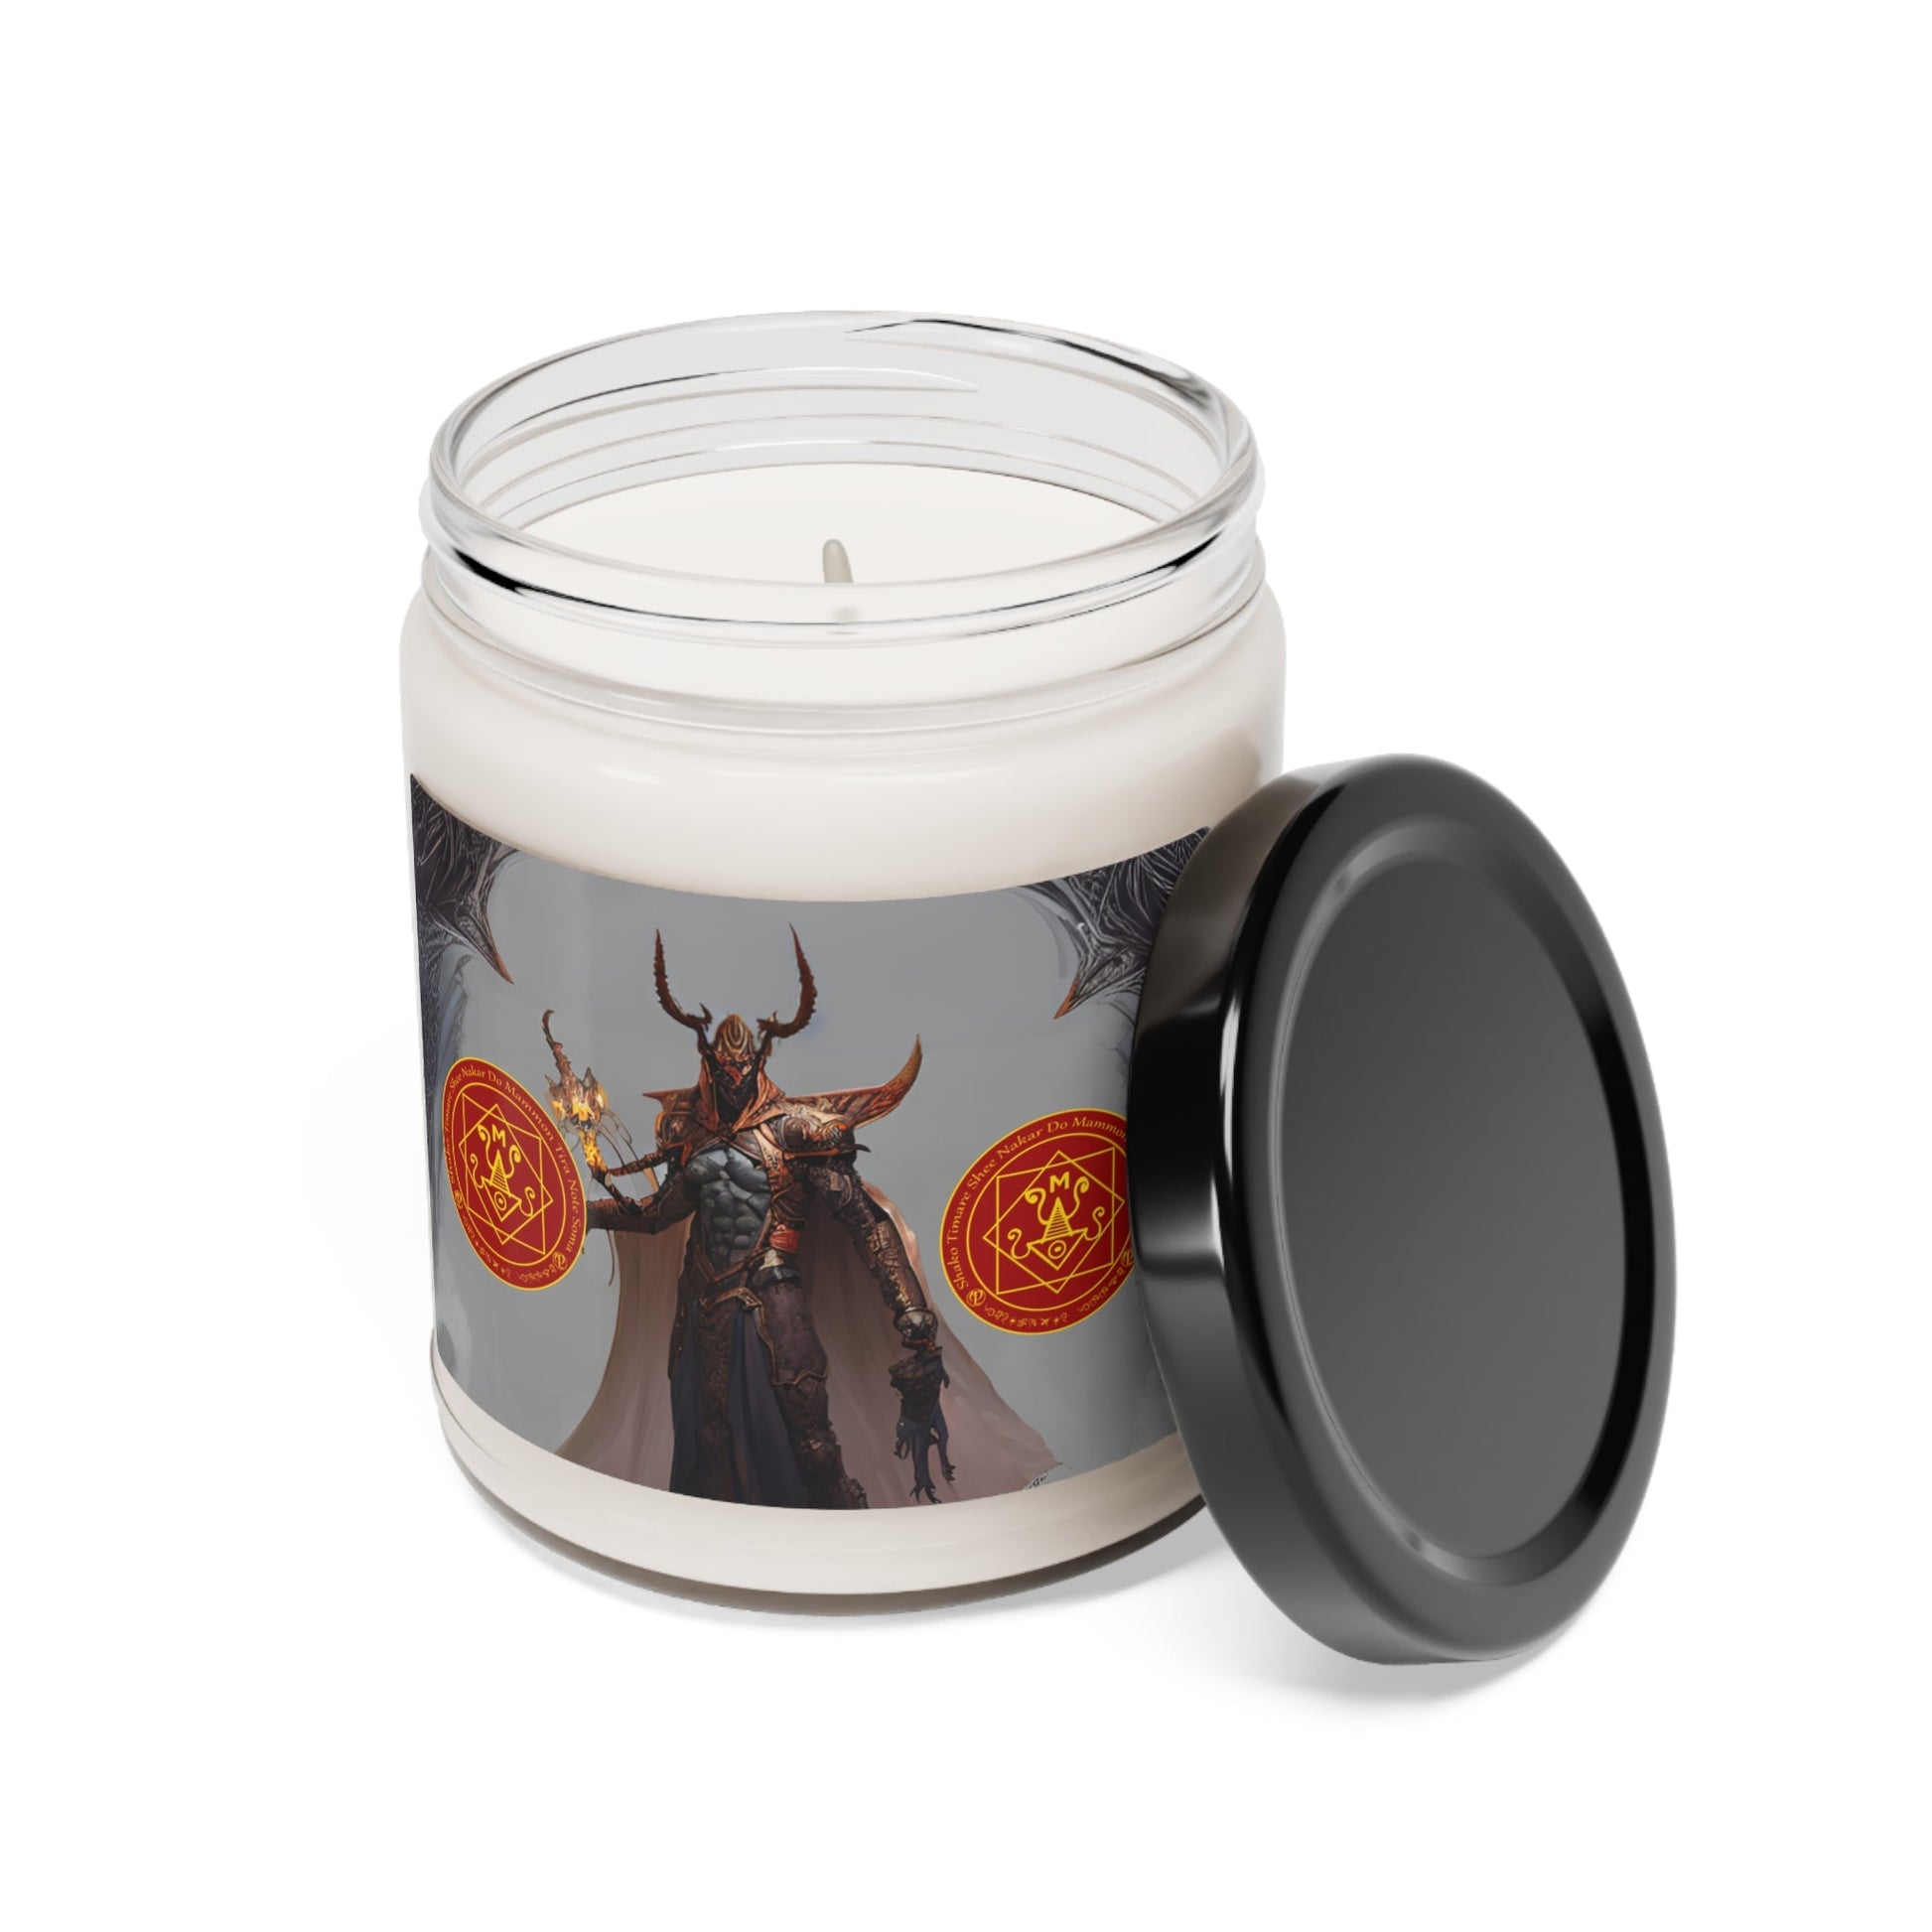 Demon-Mammon-Altar-Scented-Soy-Candle-for-Money-related-offerings-rituals-initiations-or-praying-and-meditation-7